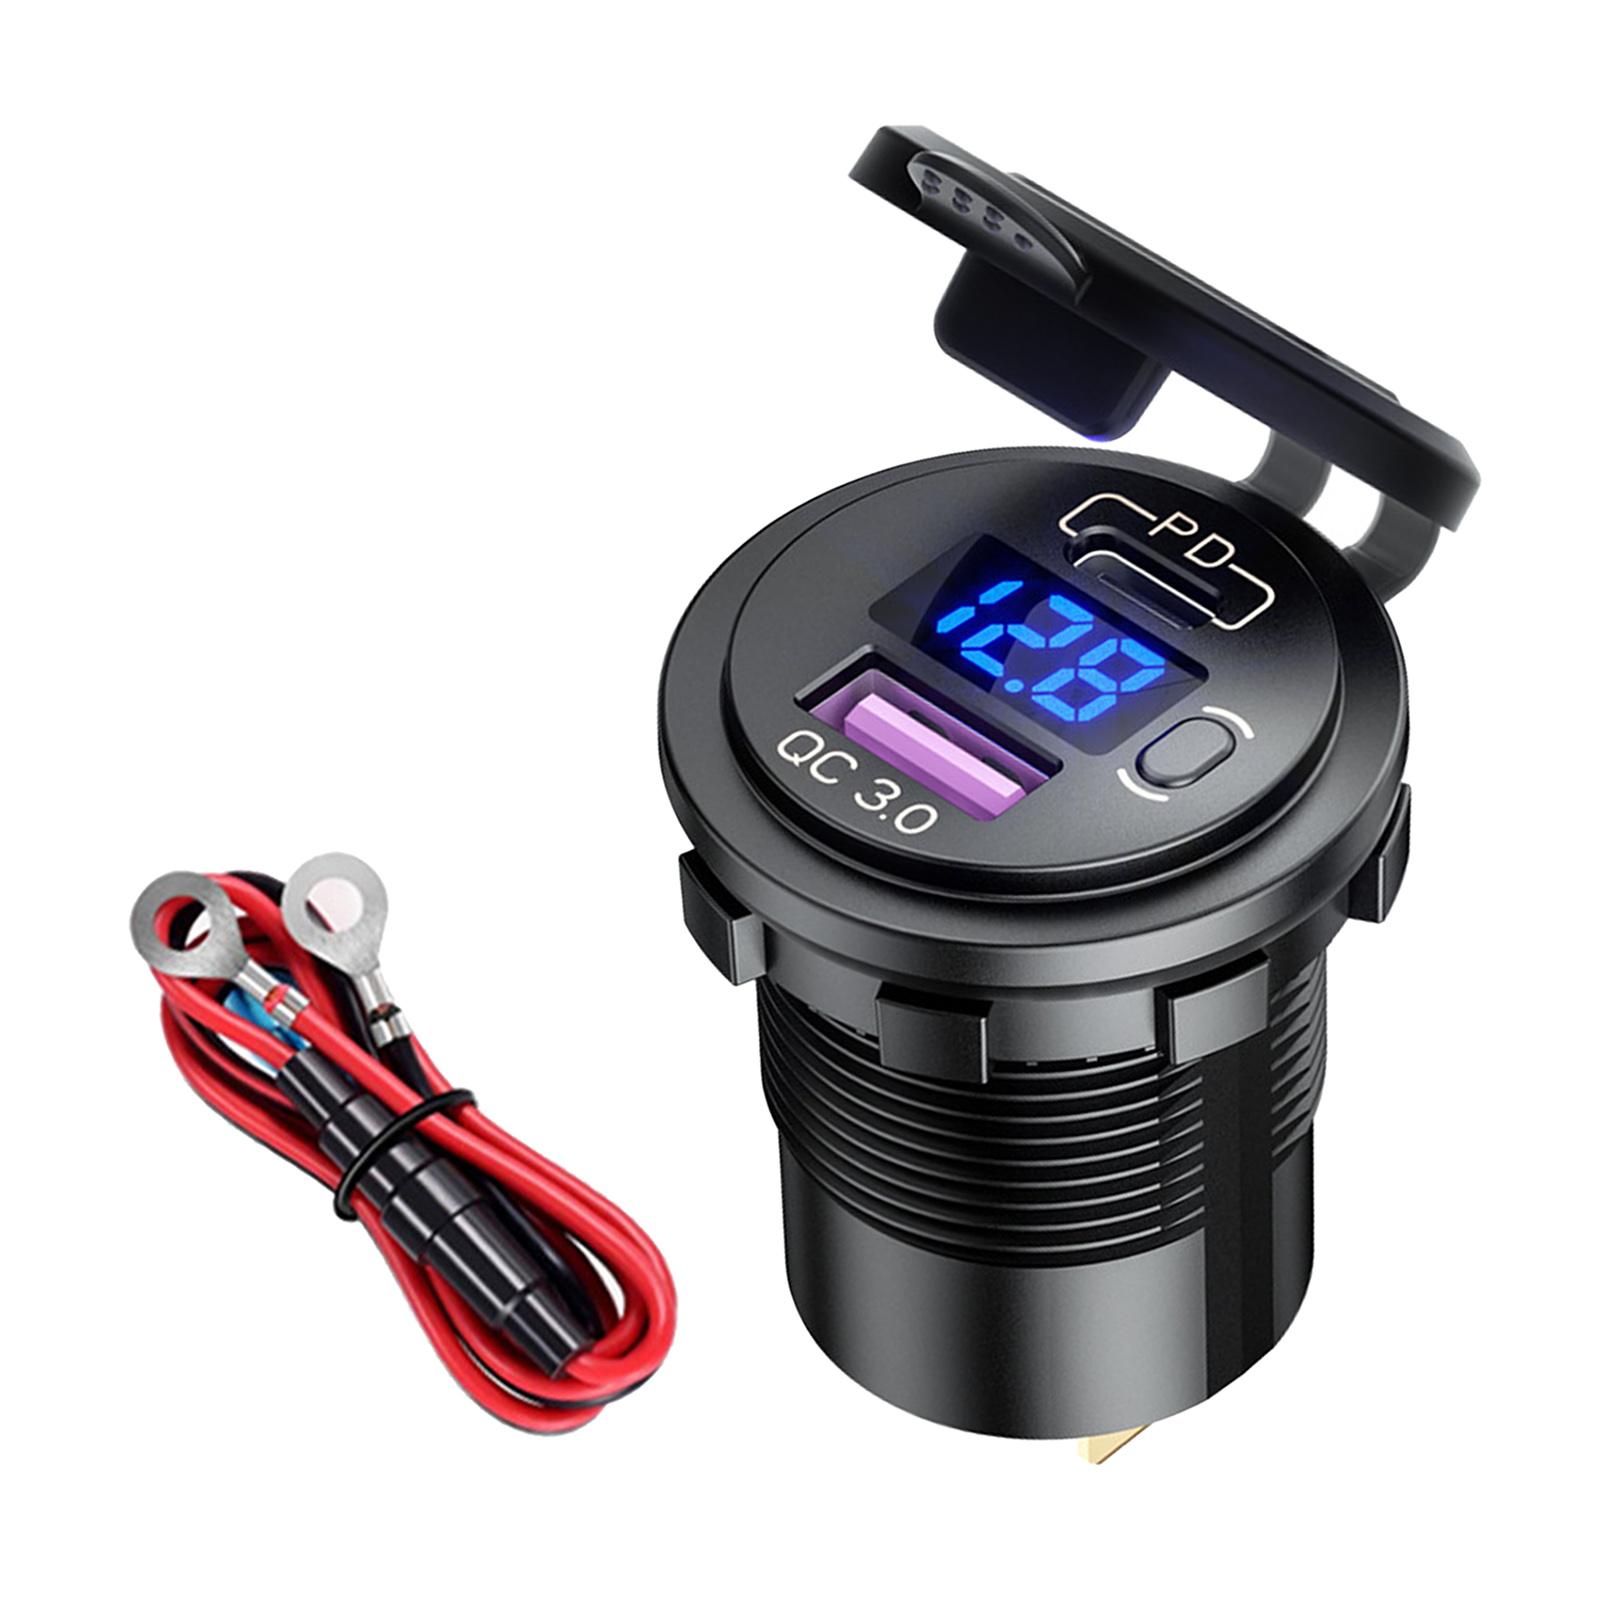 Dual USB Car Charger Quick Charge PD&QC 3.0 Voltage Measure